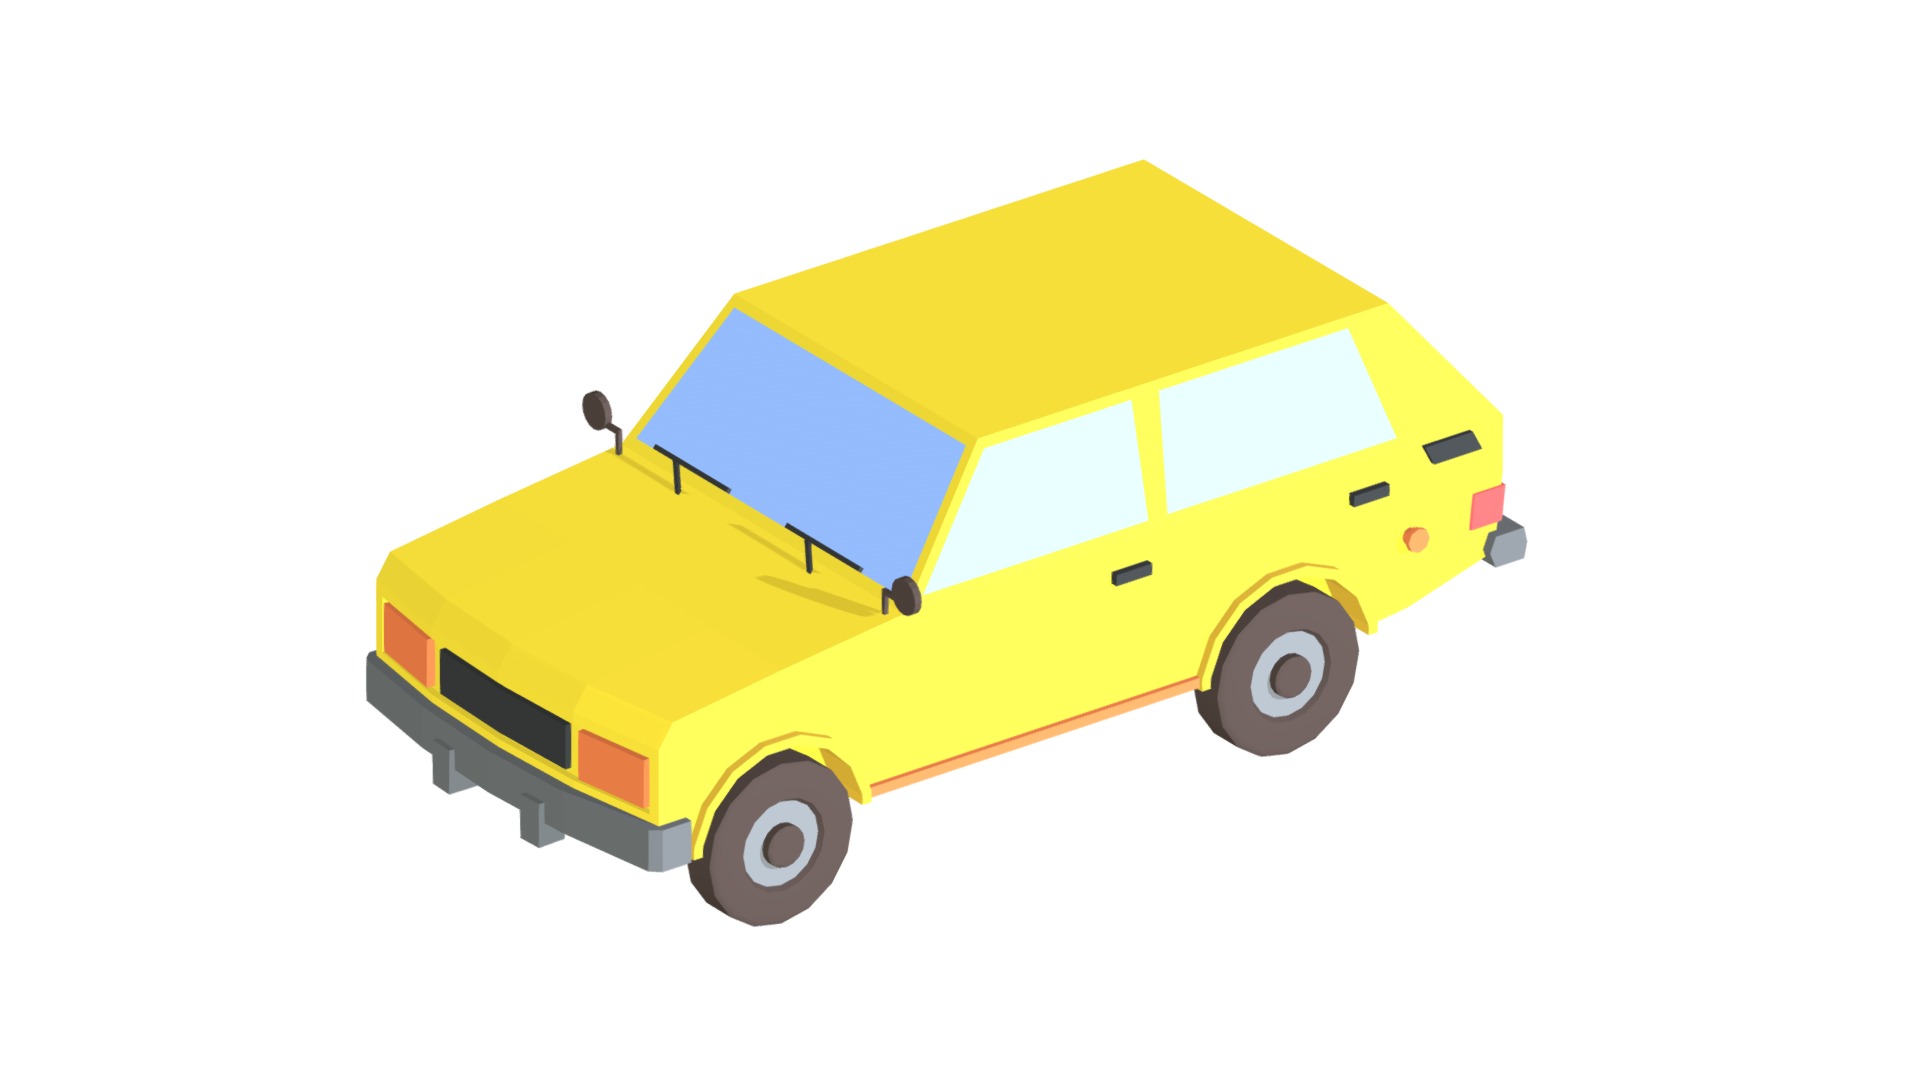 3D model Low Poly Car - This is a 3D model of the Low Poly Car. The 3D model is about a yellow and red car.